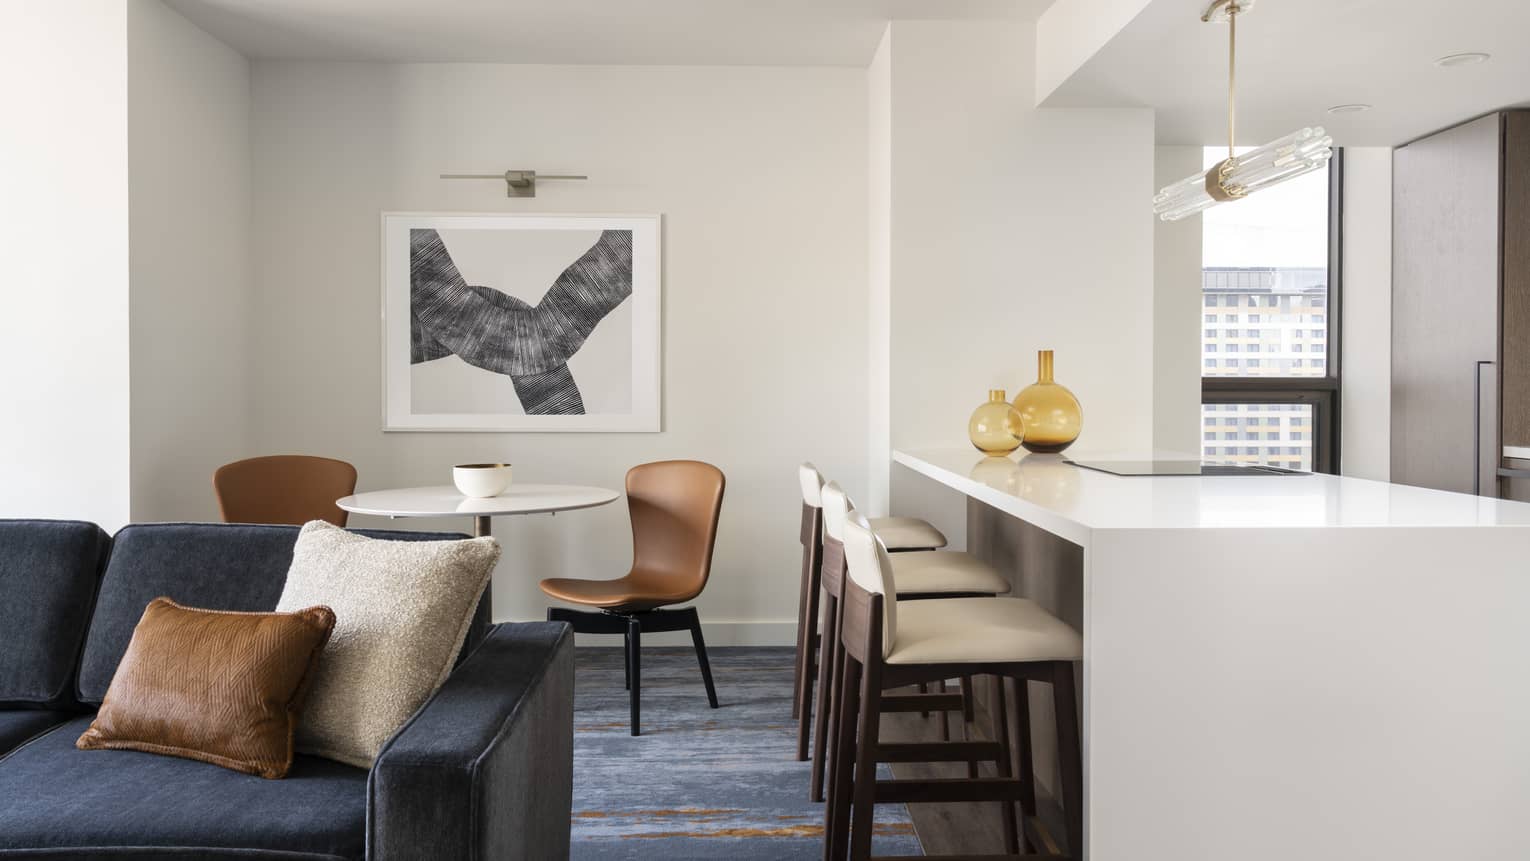 One-bedroom Residential Suite living area, dining area and kitchen with dark blue accents and bar stools